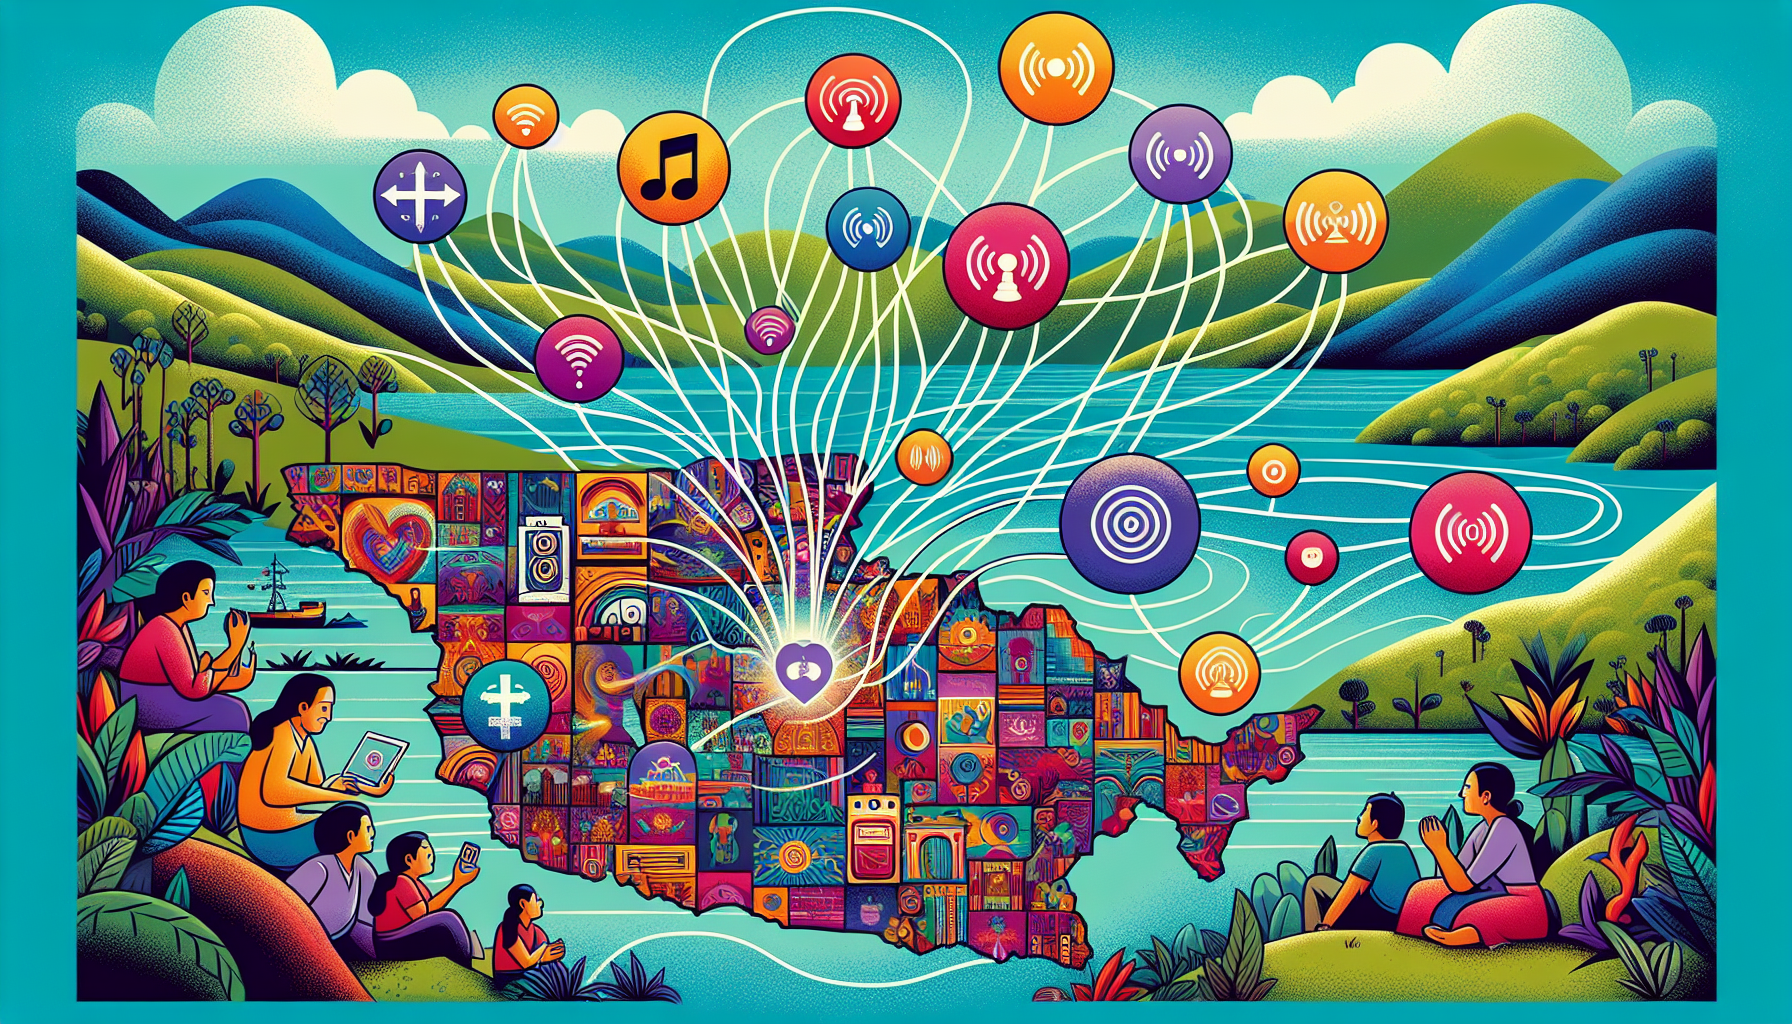 An illustration of a colorful map of Guatemala with various vibrant icons representing different Christian radio stations, each with unique designs symbolizing music and faith, interconnected with swi